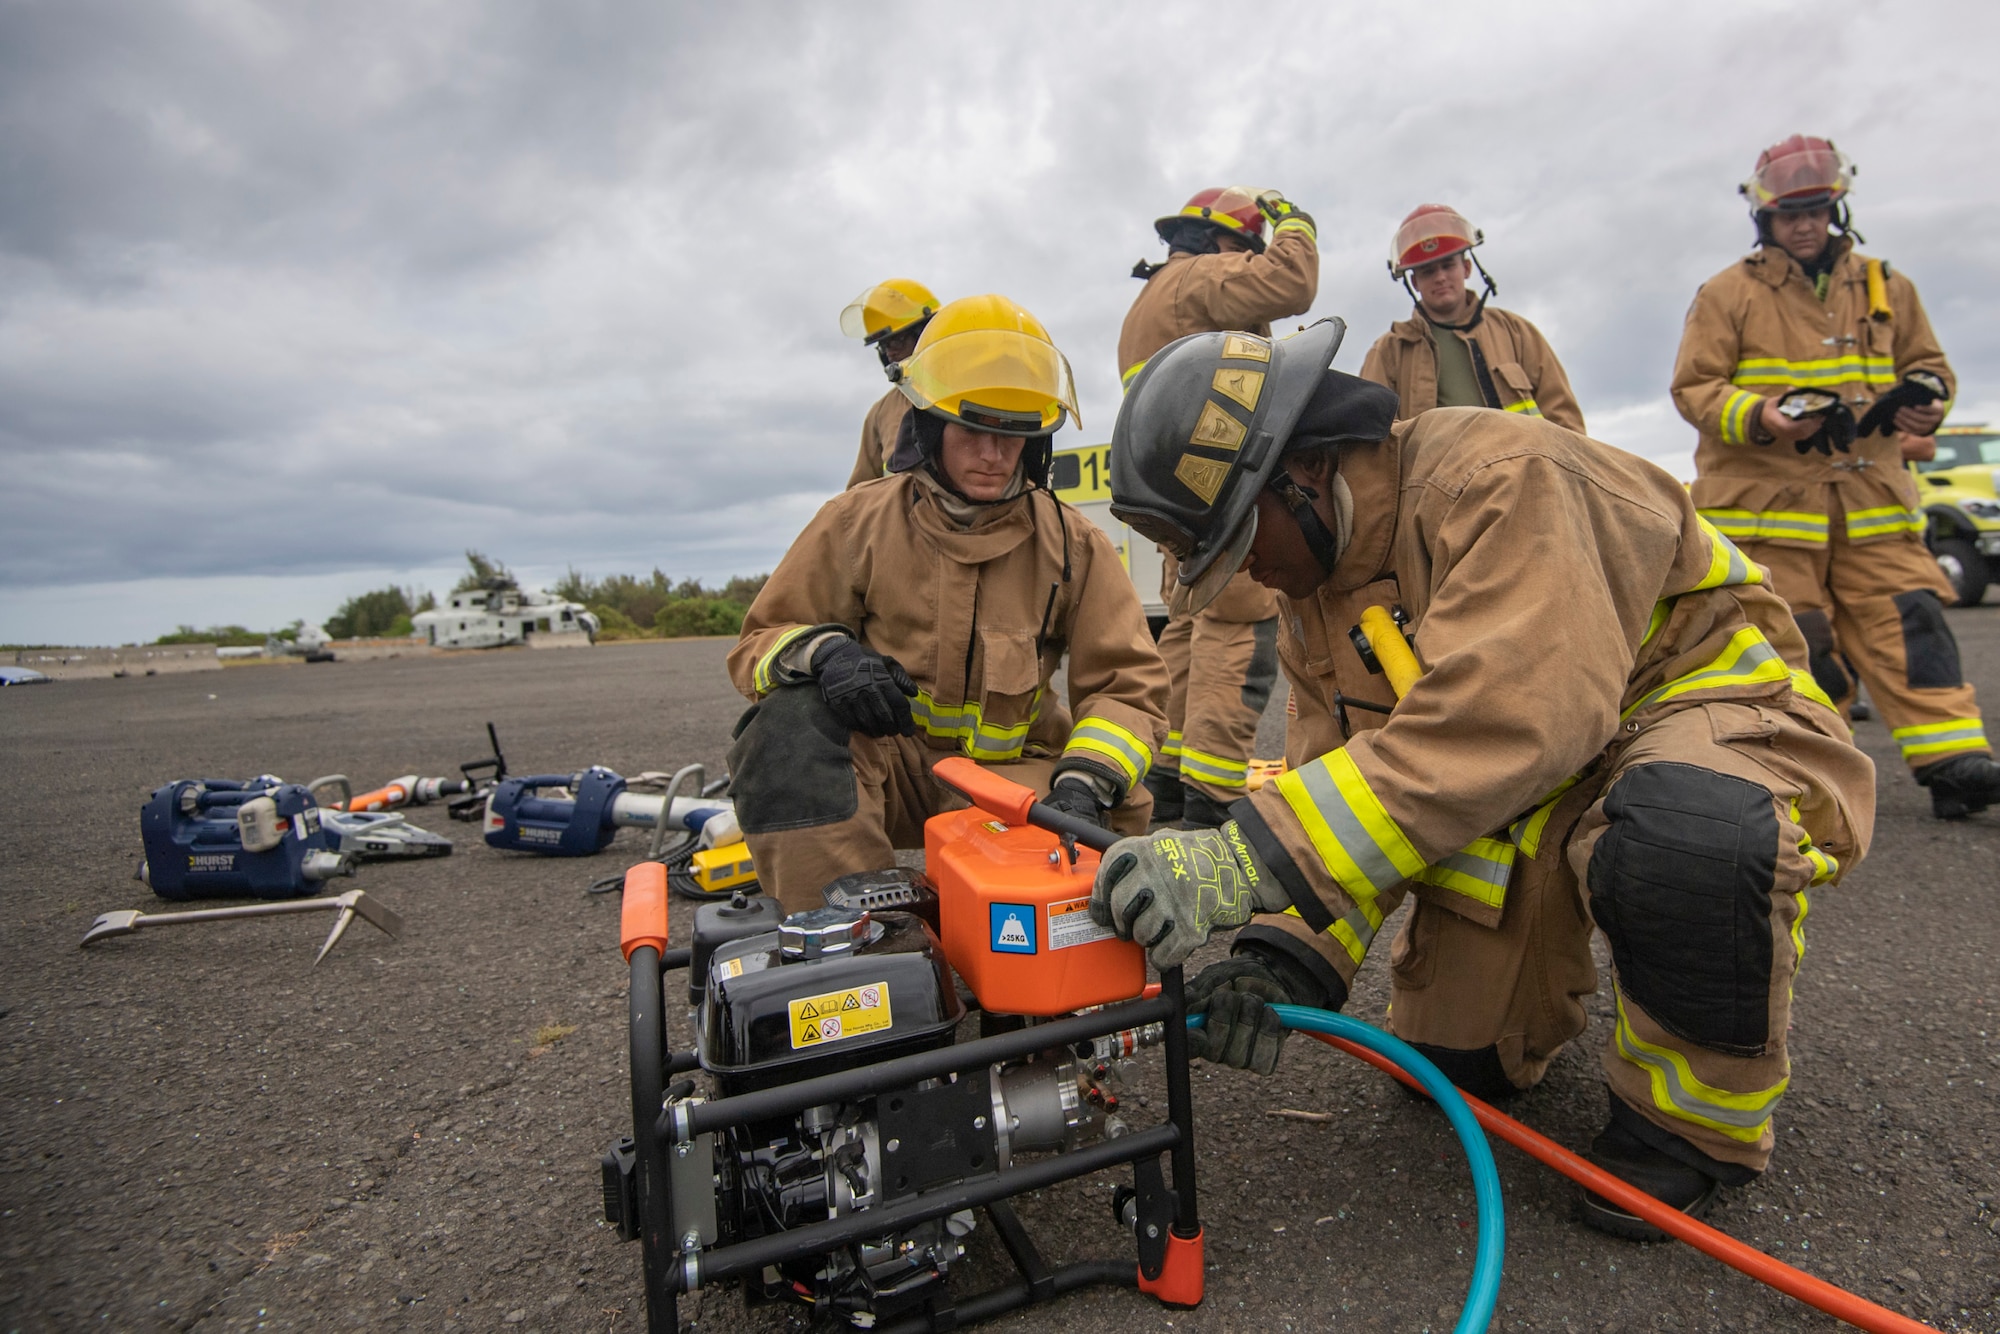 FIrefighters train together to increase proficiency